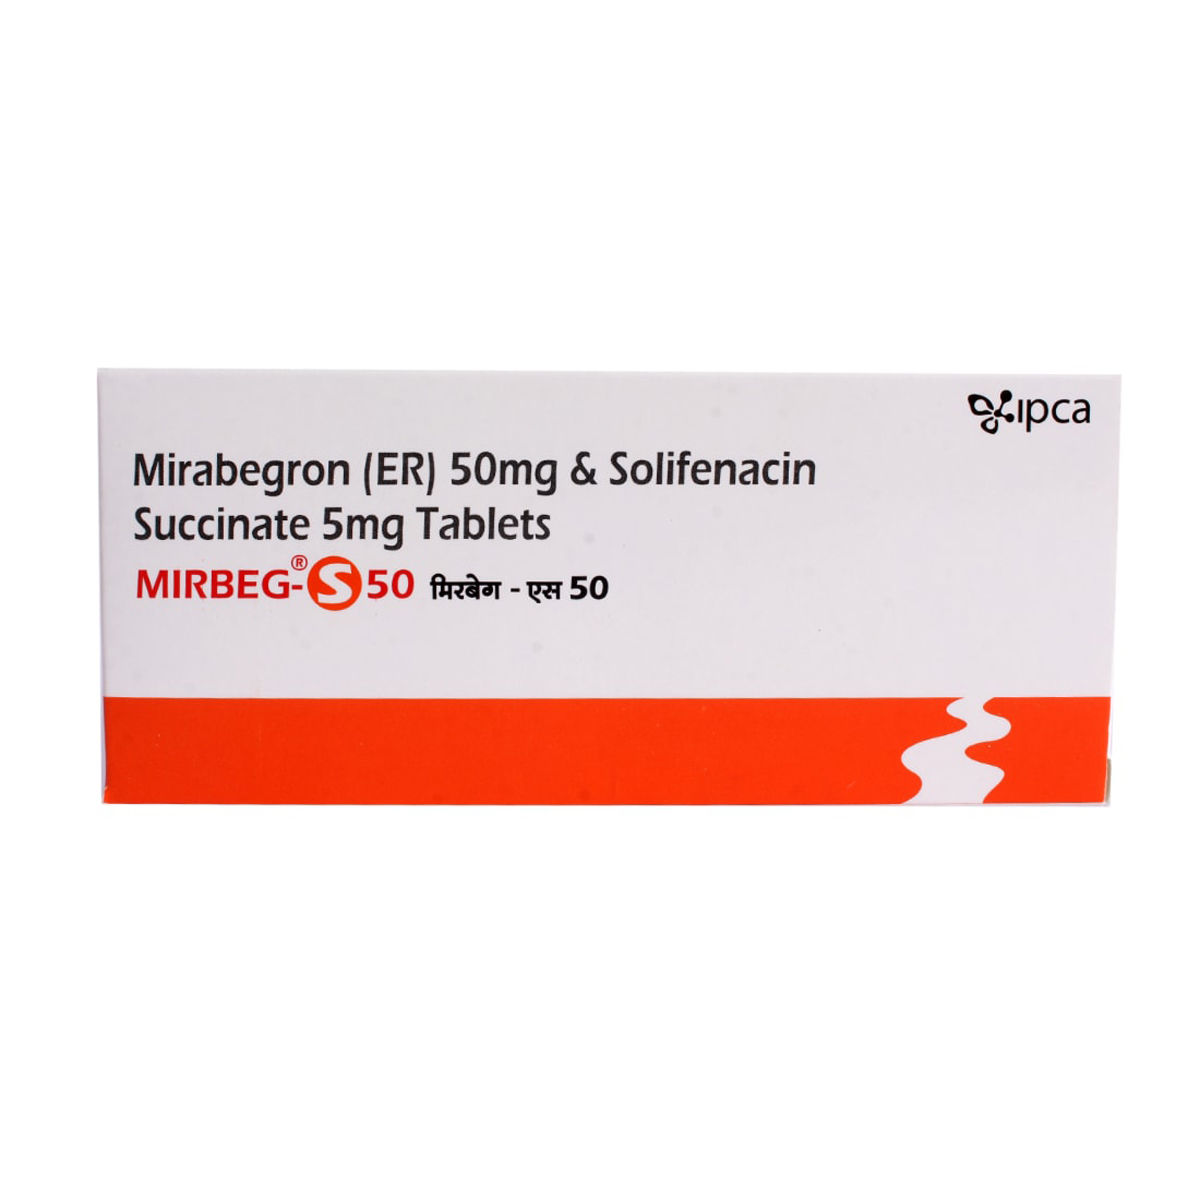 Mirbeg-S 50 Tablet 10's, Pack of 10 TABLETS